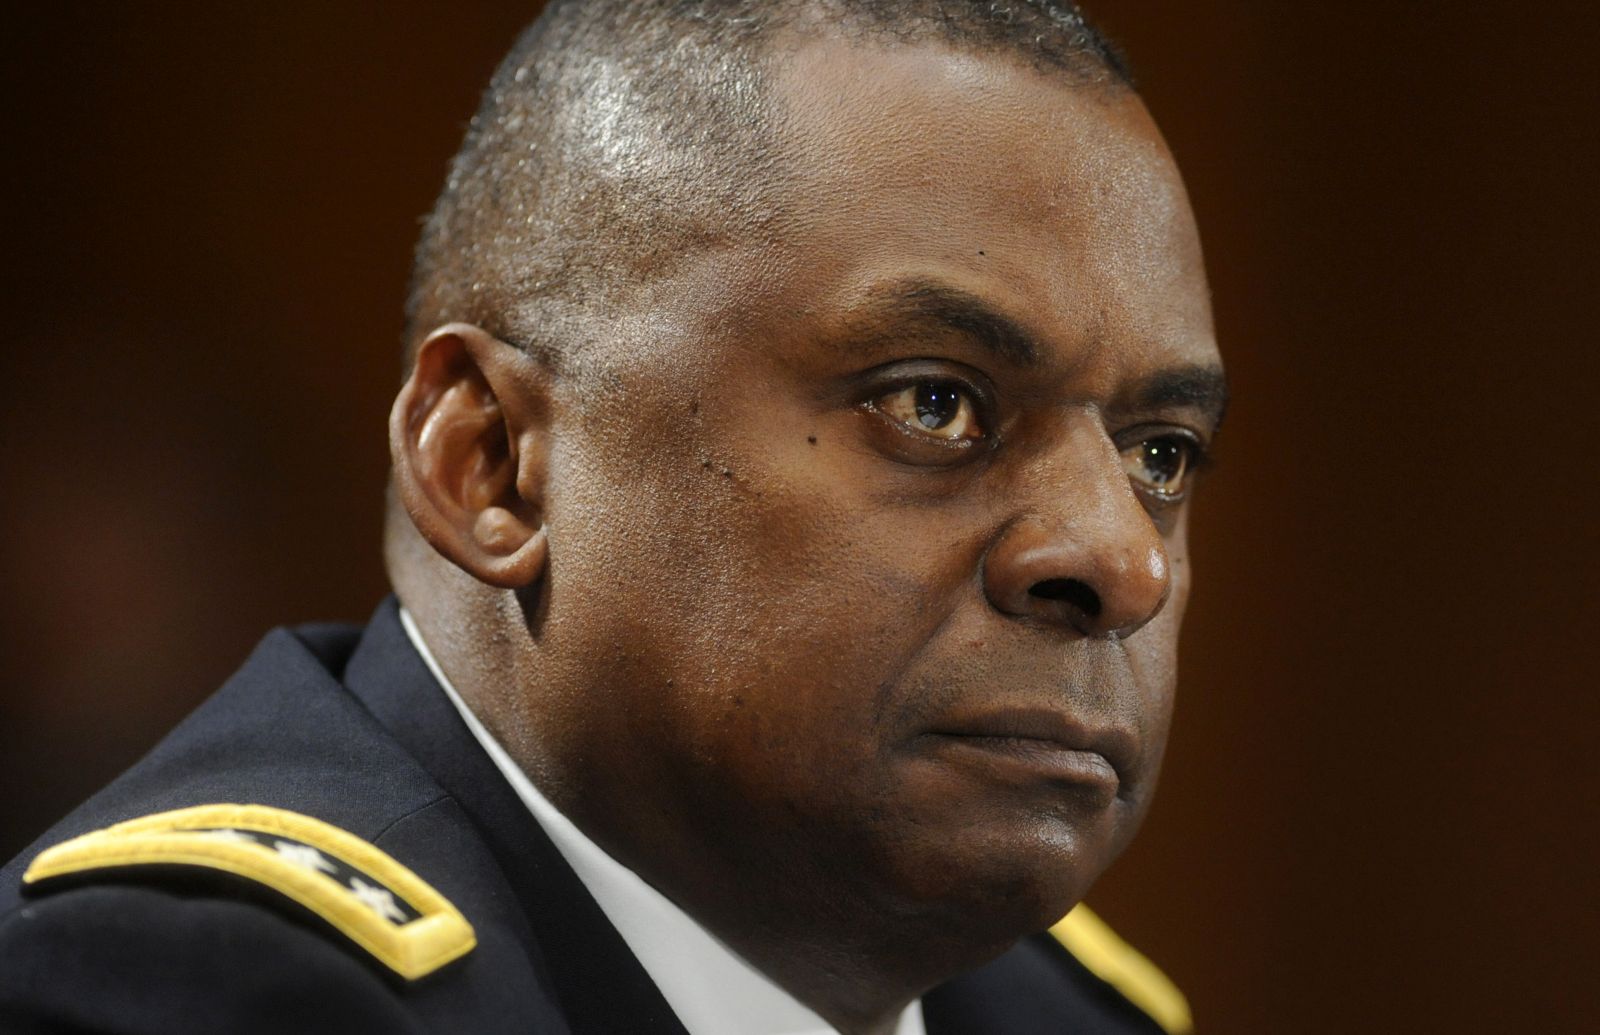 epa08869577 (FILE) - General Lloyd James Austin III, commanding general of United States Forces - Iraq, appears before the US Senate Armed Services Committee hearing on US policy towards Iraq, on Capitol Hill in Washington DC, USA, 03 February 2011 (reissued 08 December 2020). According to media reports on 08 December, US President-elect Joe Biden picked retired General Lloyd James Austin III to be his Defense Secretary. If confirmed by the Senate, Austin will be the first African American to hold the position.  EPA/MICHAEL REYNOLDS